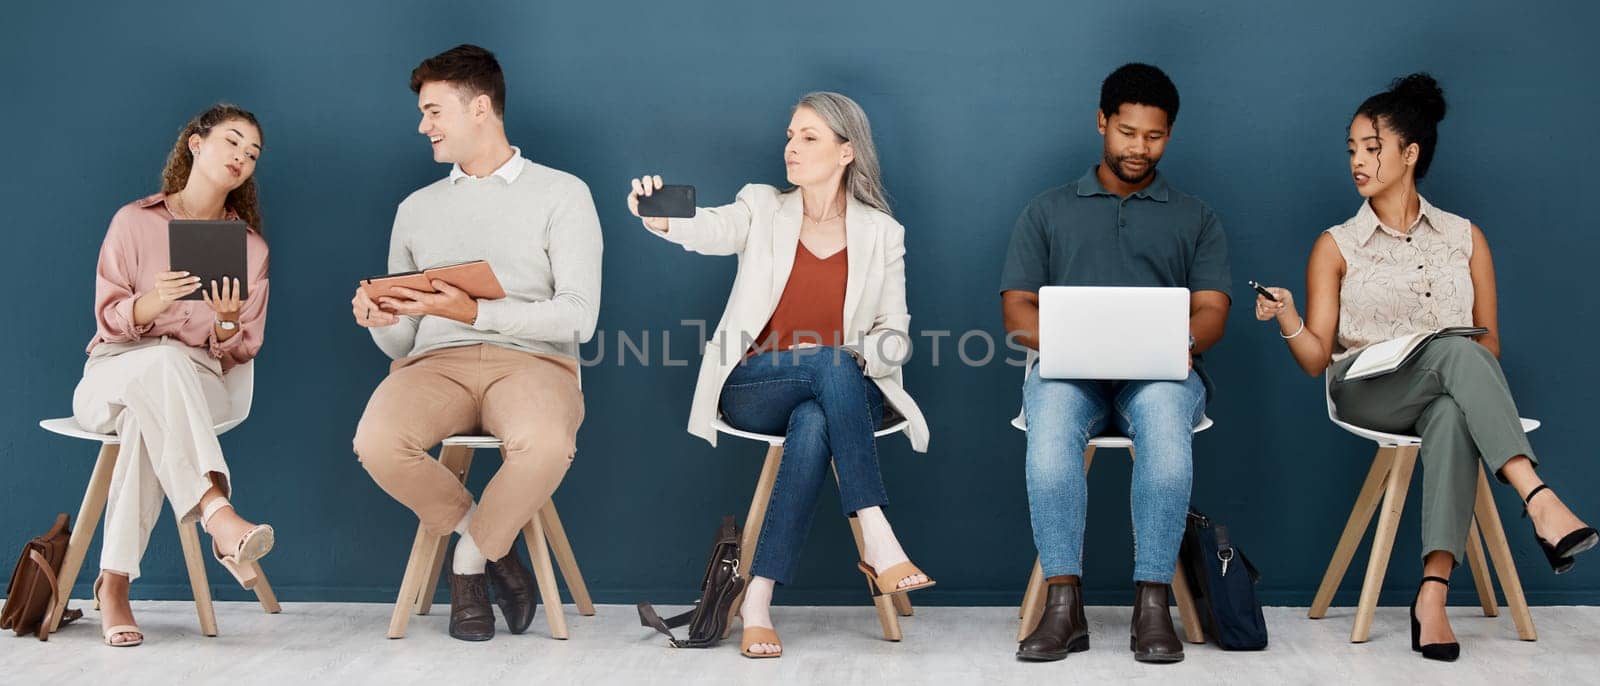 Hiring, technology and business people waiting for job interview, vacancy and opportunity in office. Recruitment, diversity and men and women on phone, tablet and laptop to prepare for hr meeting.